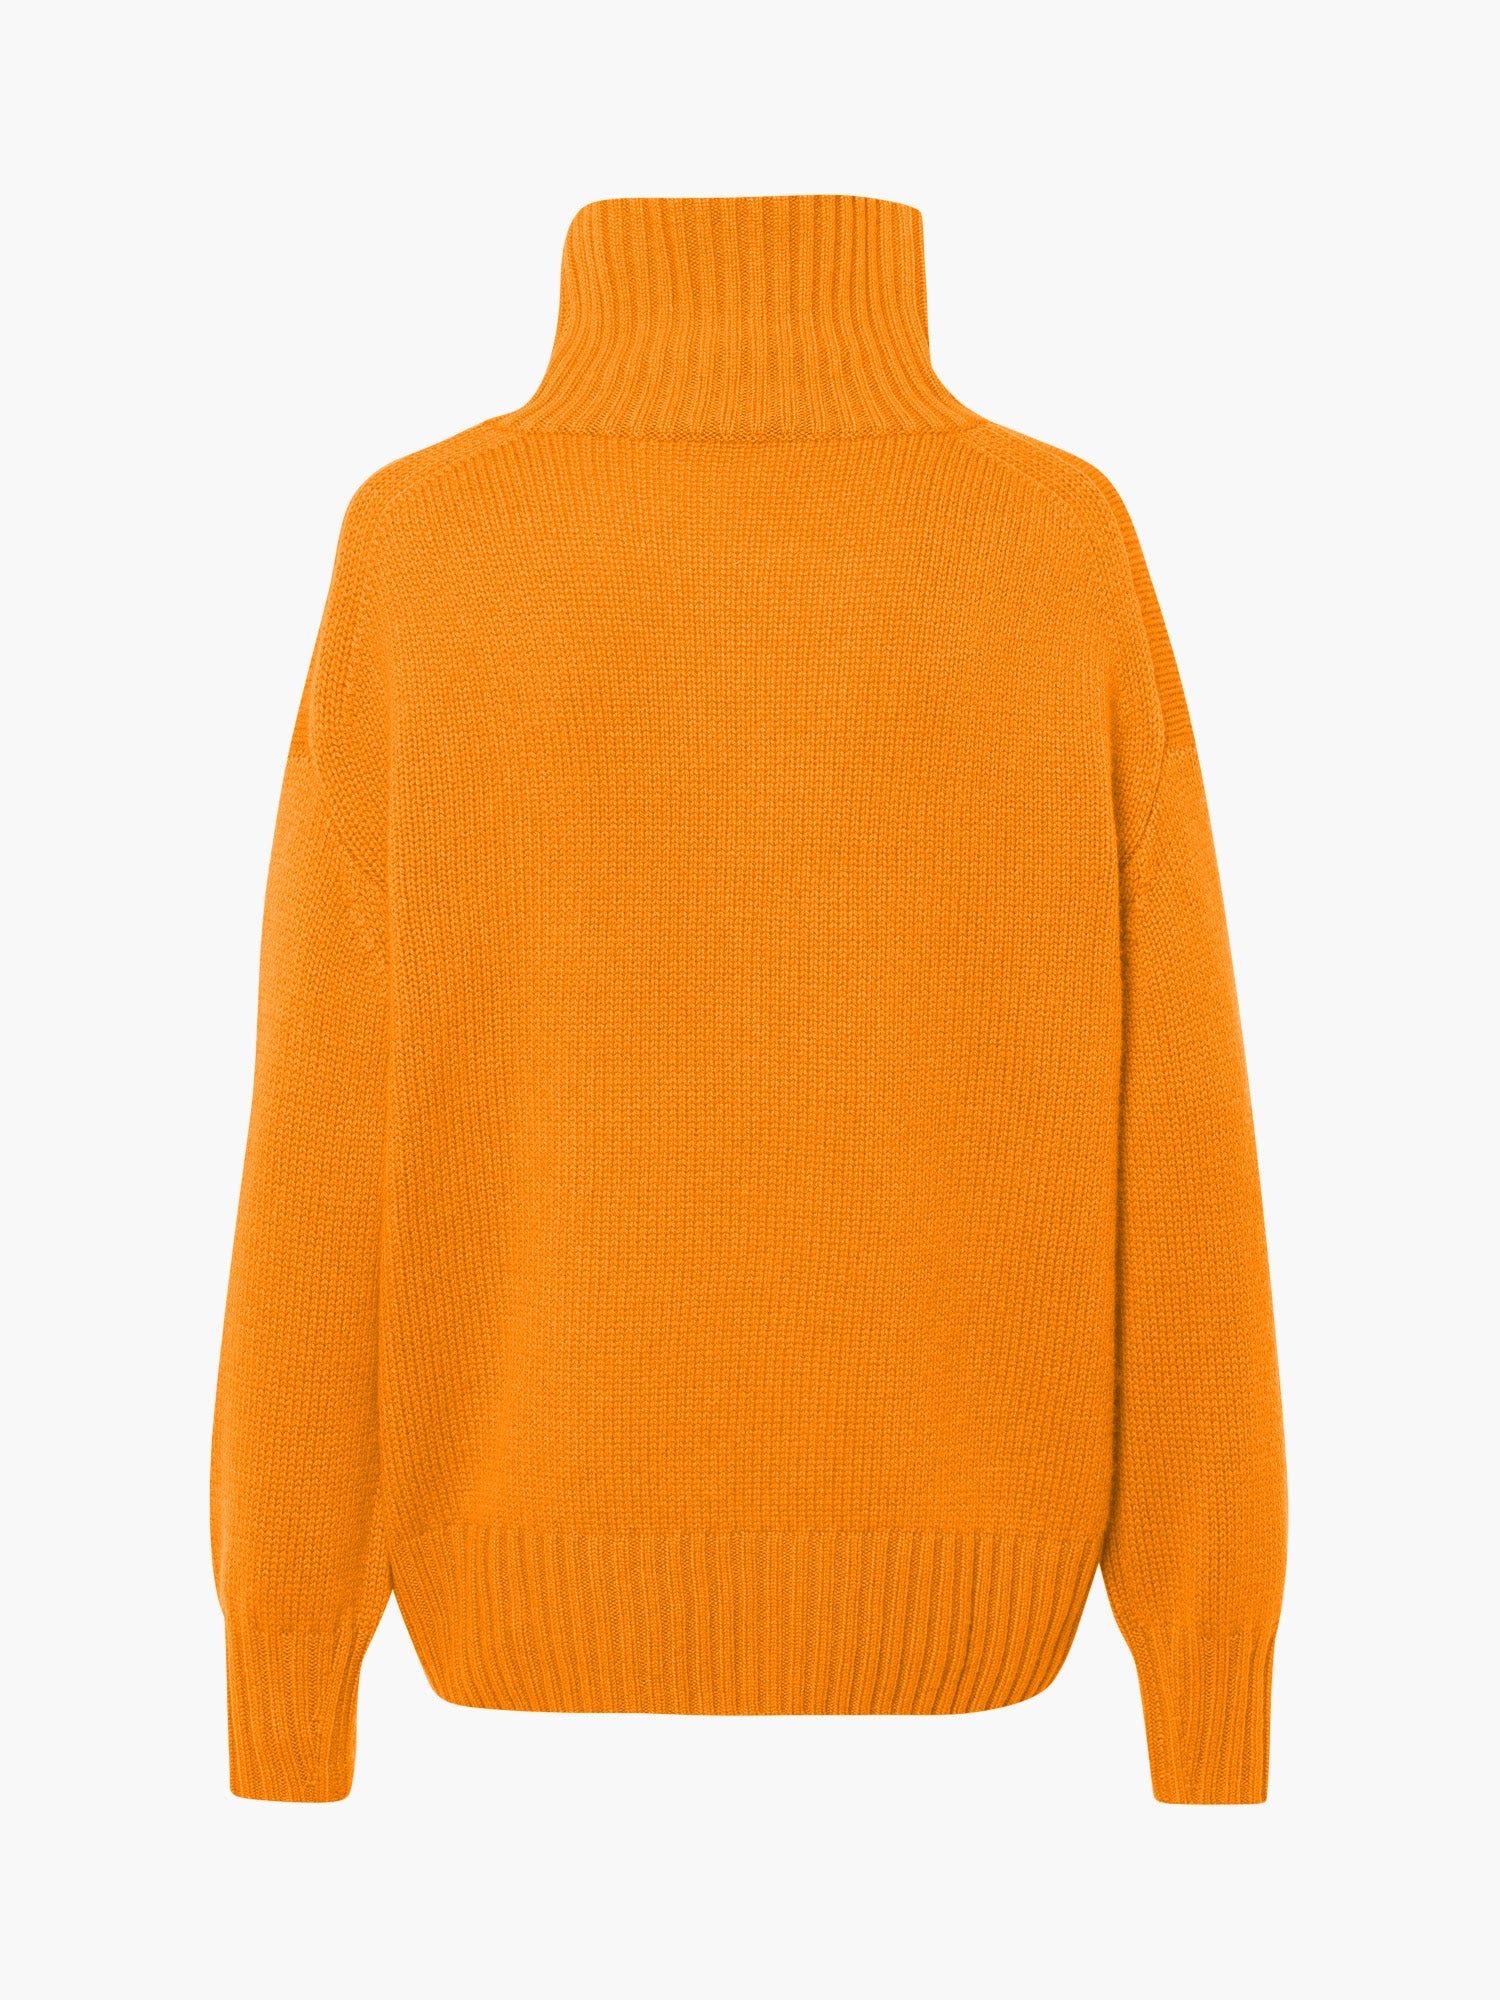 FTC-Cashmere-OUTLET-SALE-Pullover-Polo-100-Cashmere-7gg-Strick-ARCHIVE-COLLECTION-2.jpg